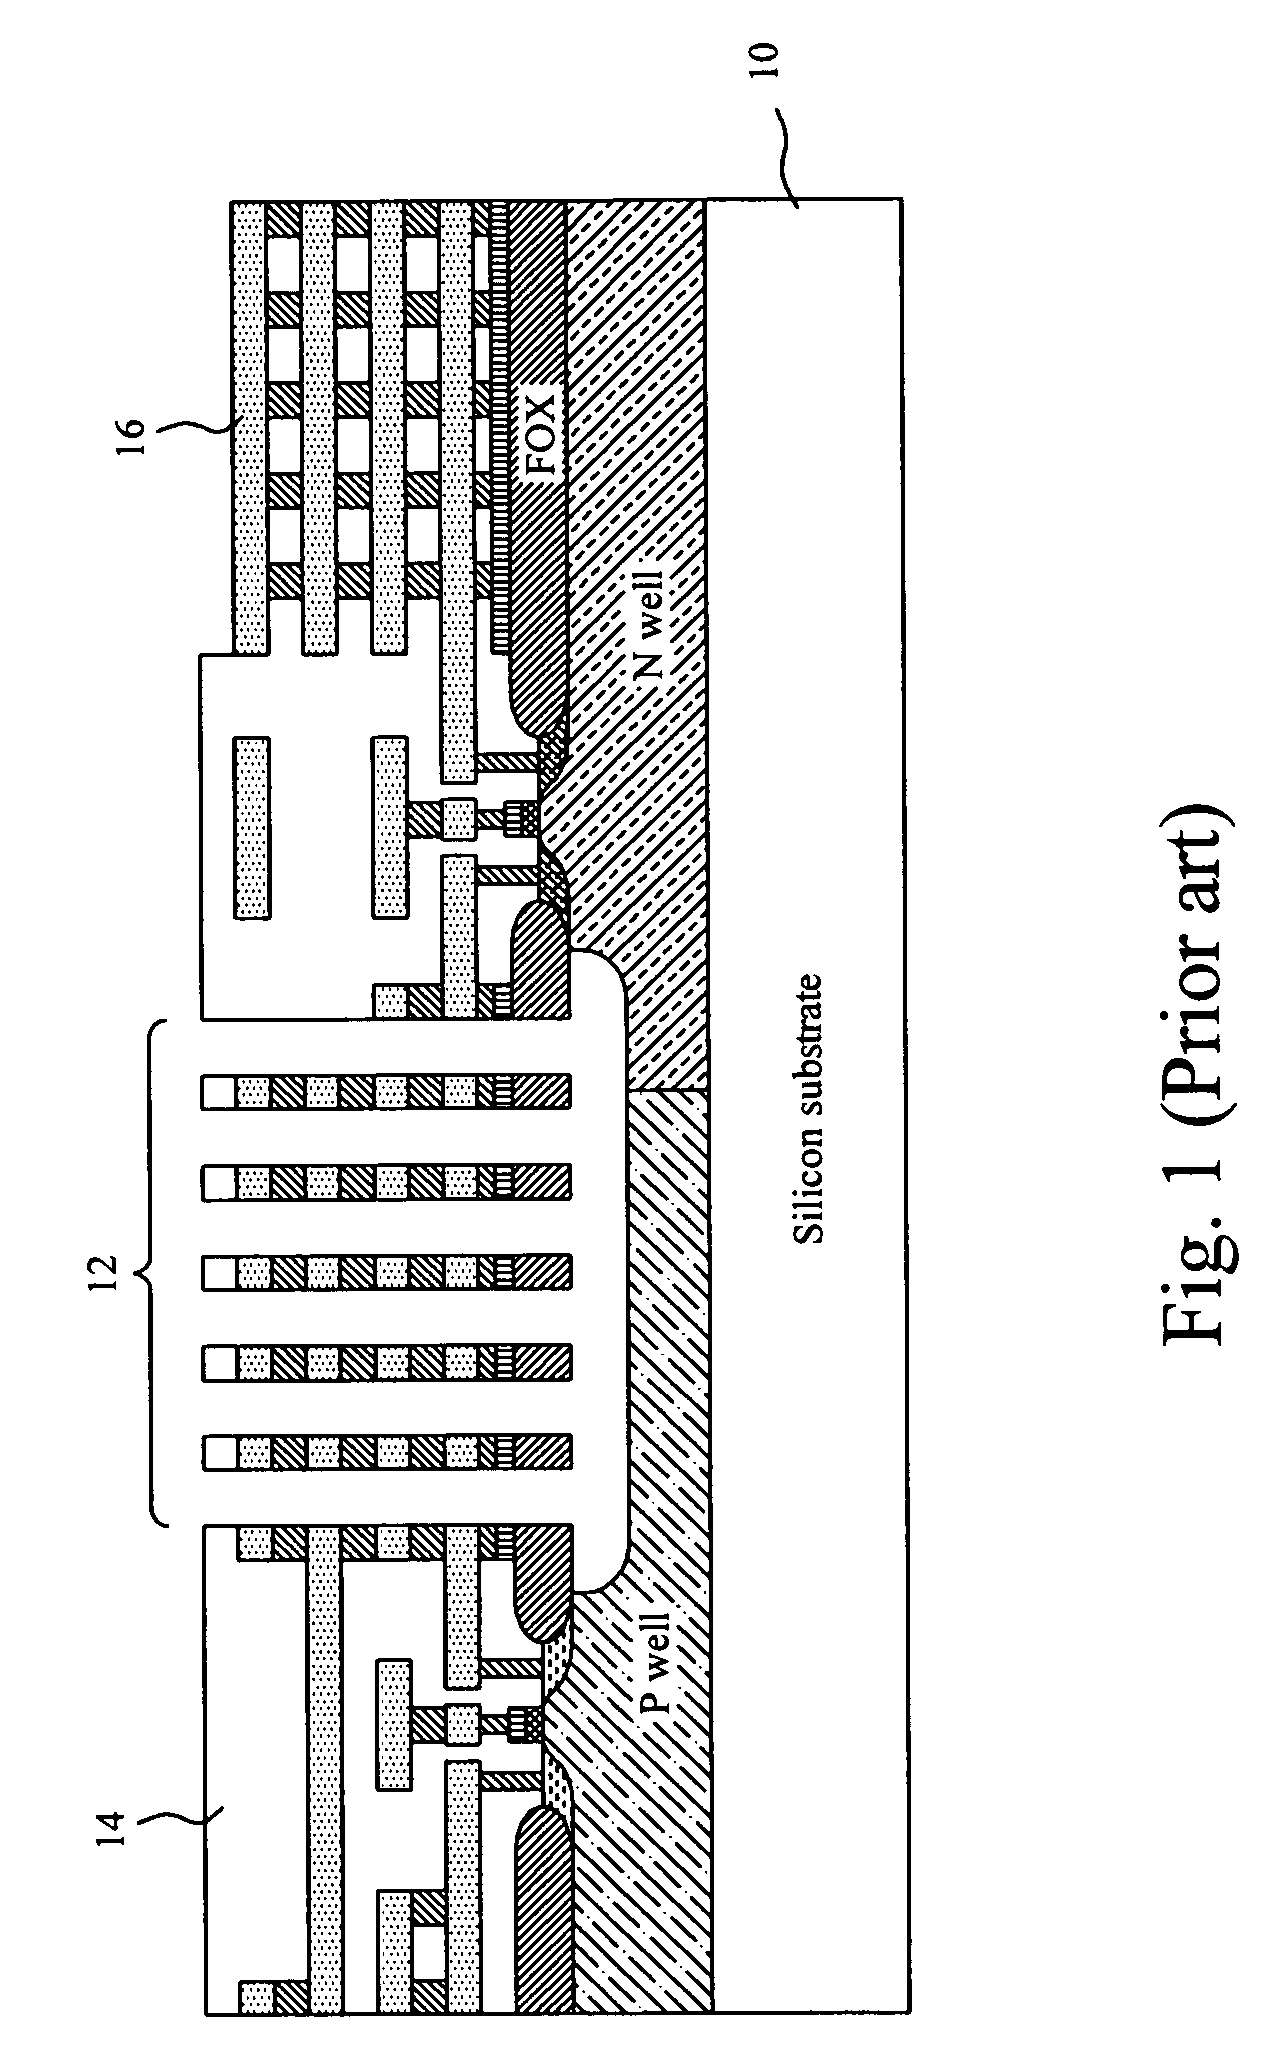 Methods for dicing a released CMOS-MEMS multi-project wafer